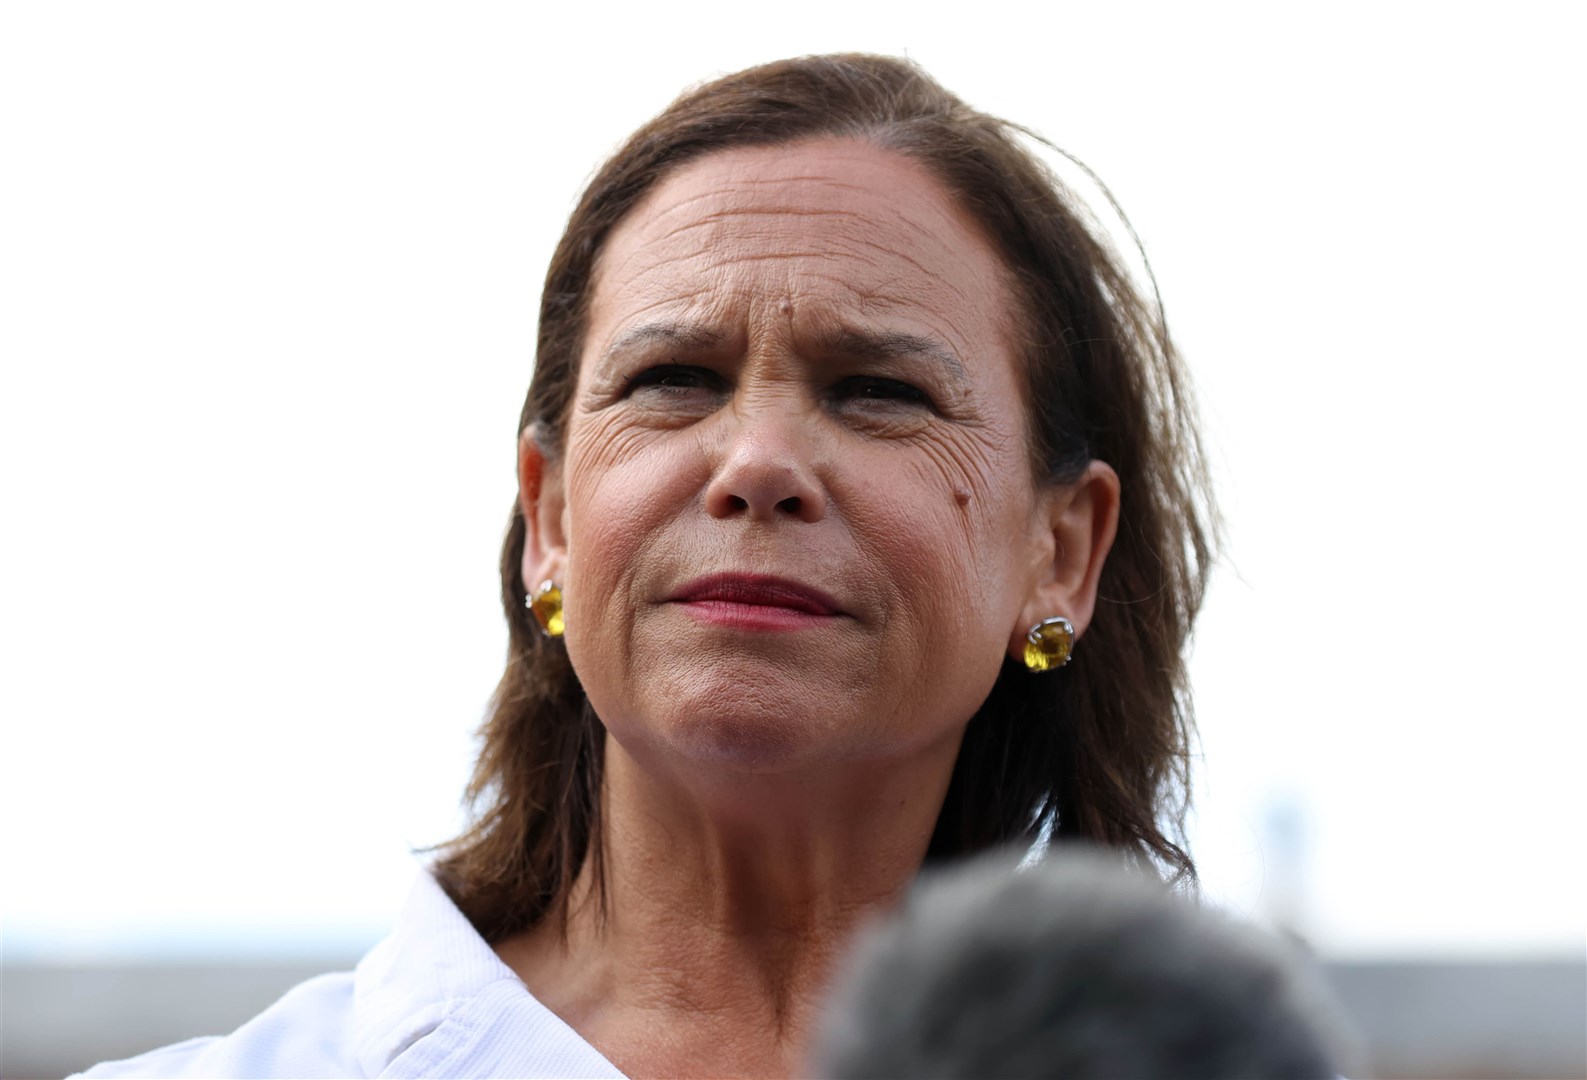 Sinn Fein president Mary Lou McDonald insisted the NI Protocol was working in its current form (Liam McBurney/PA)